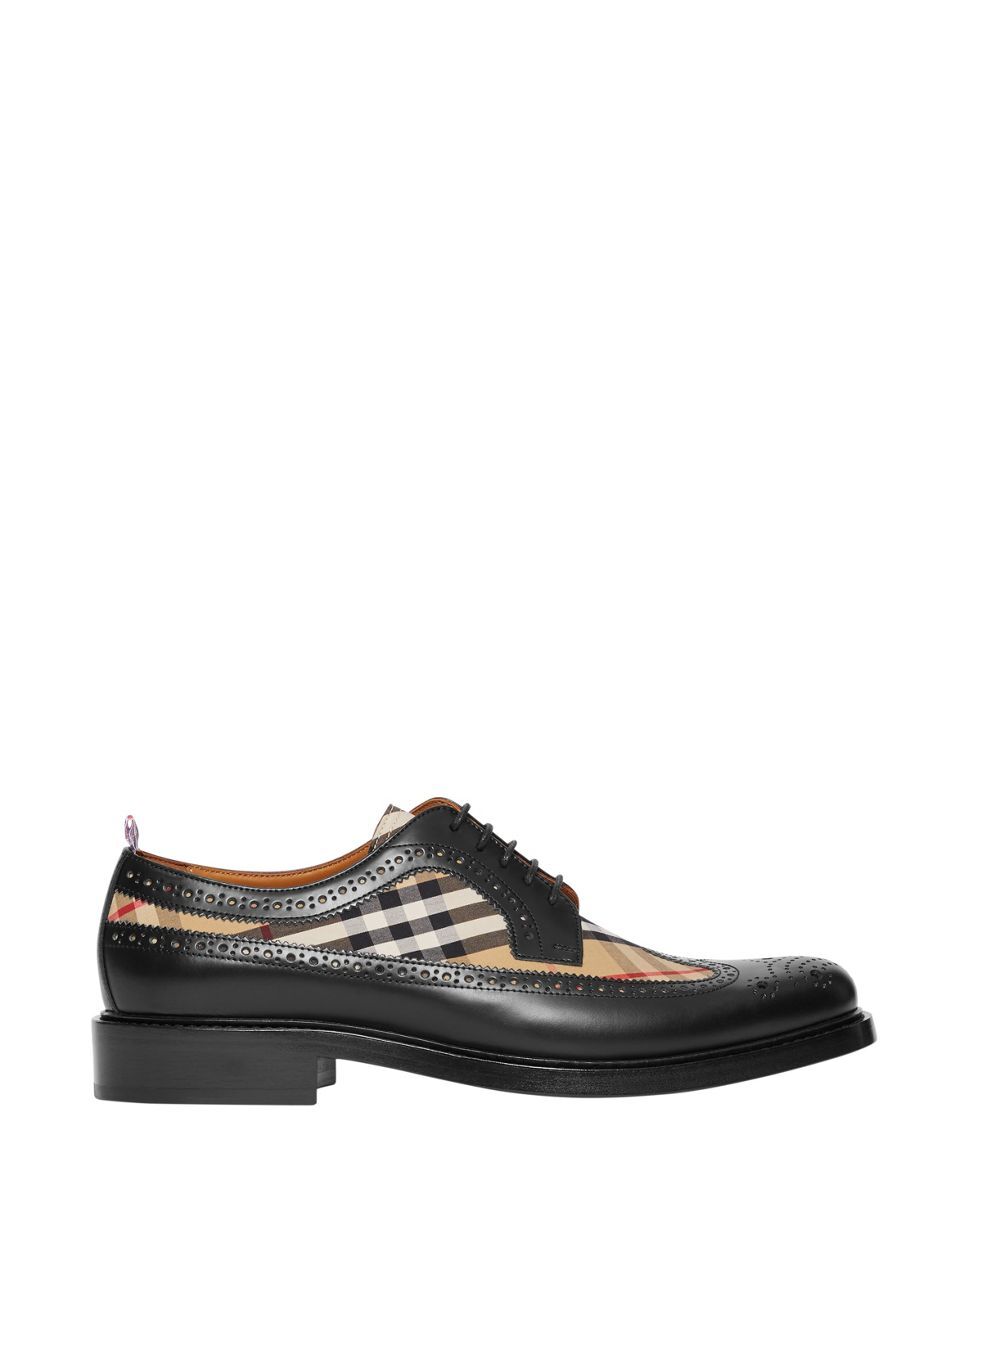 burberry oxford shoes